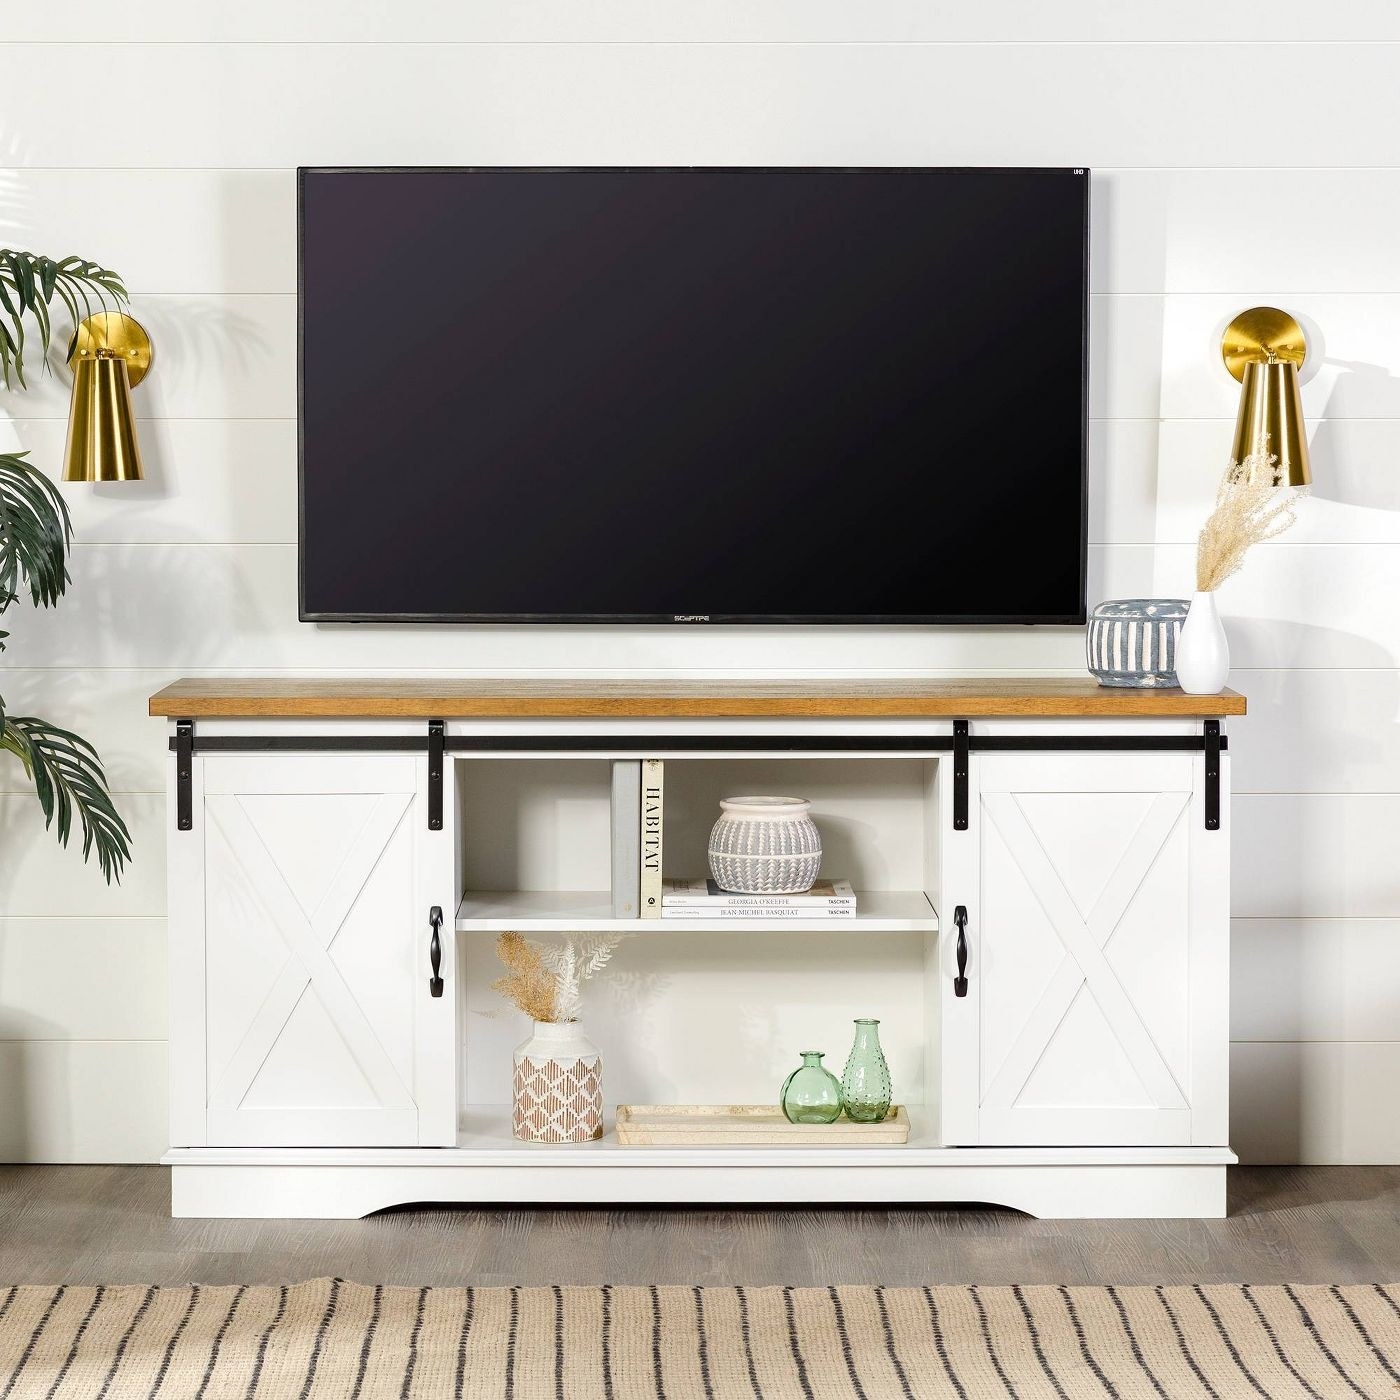 white sliding barn door TV stand with wood top below a TV hanging on wall